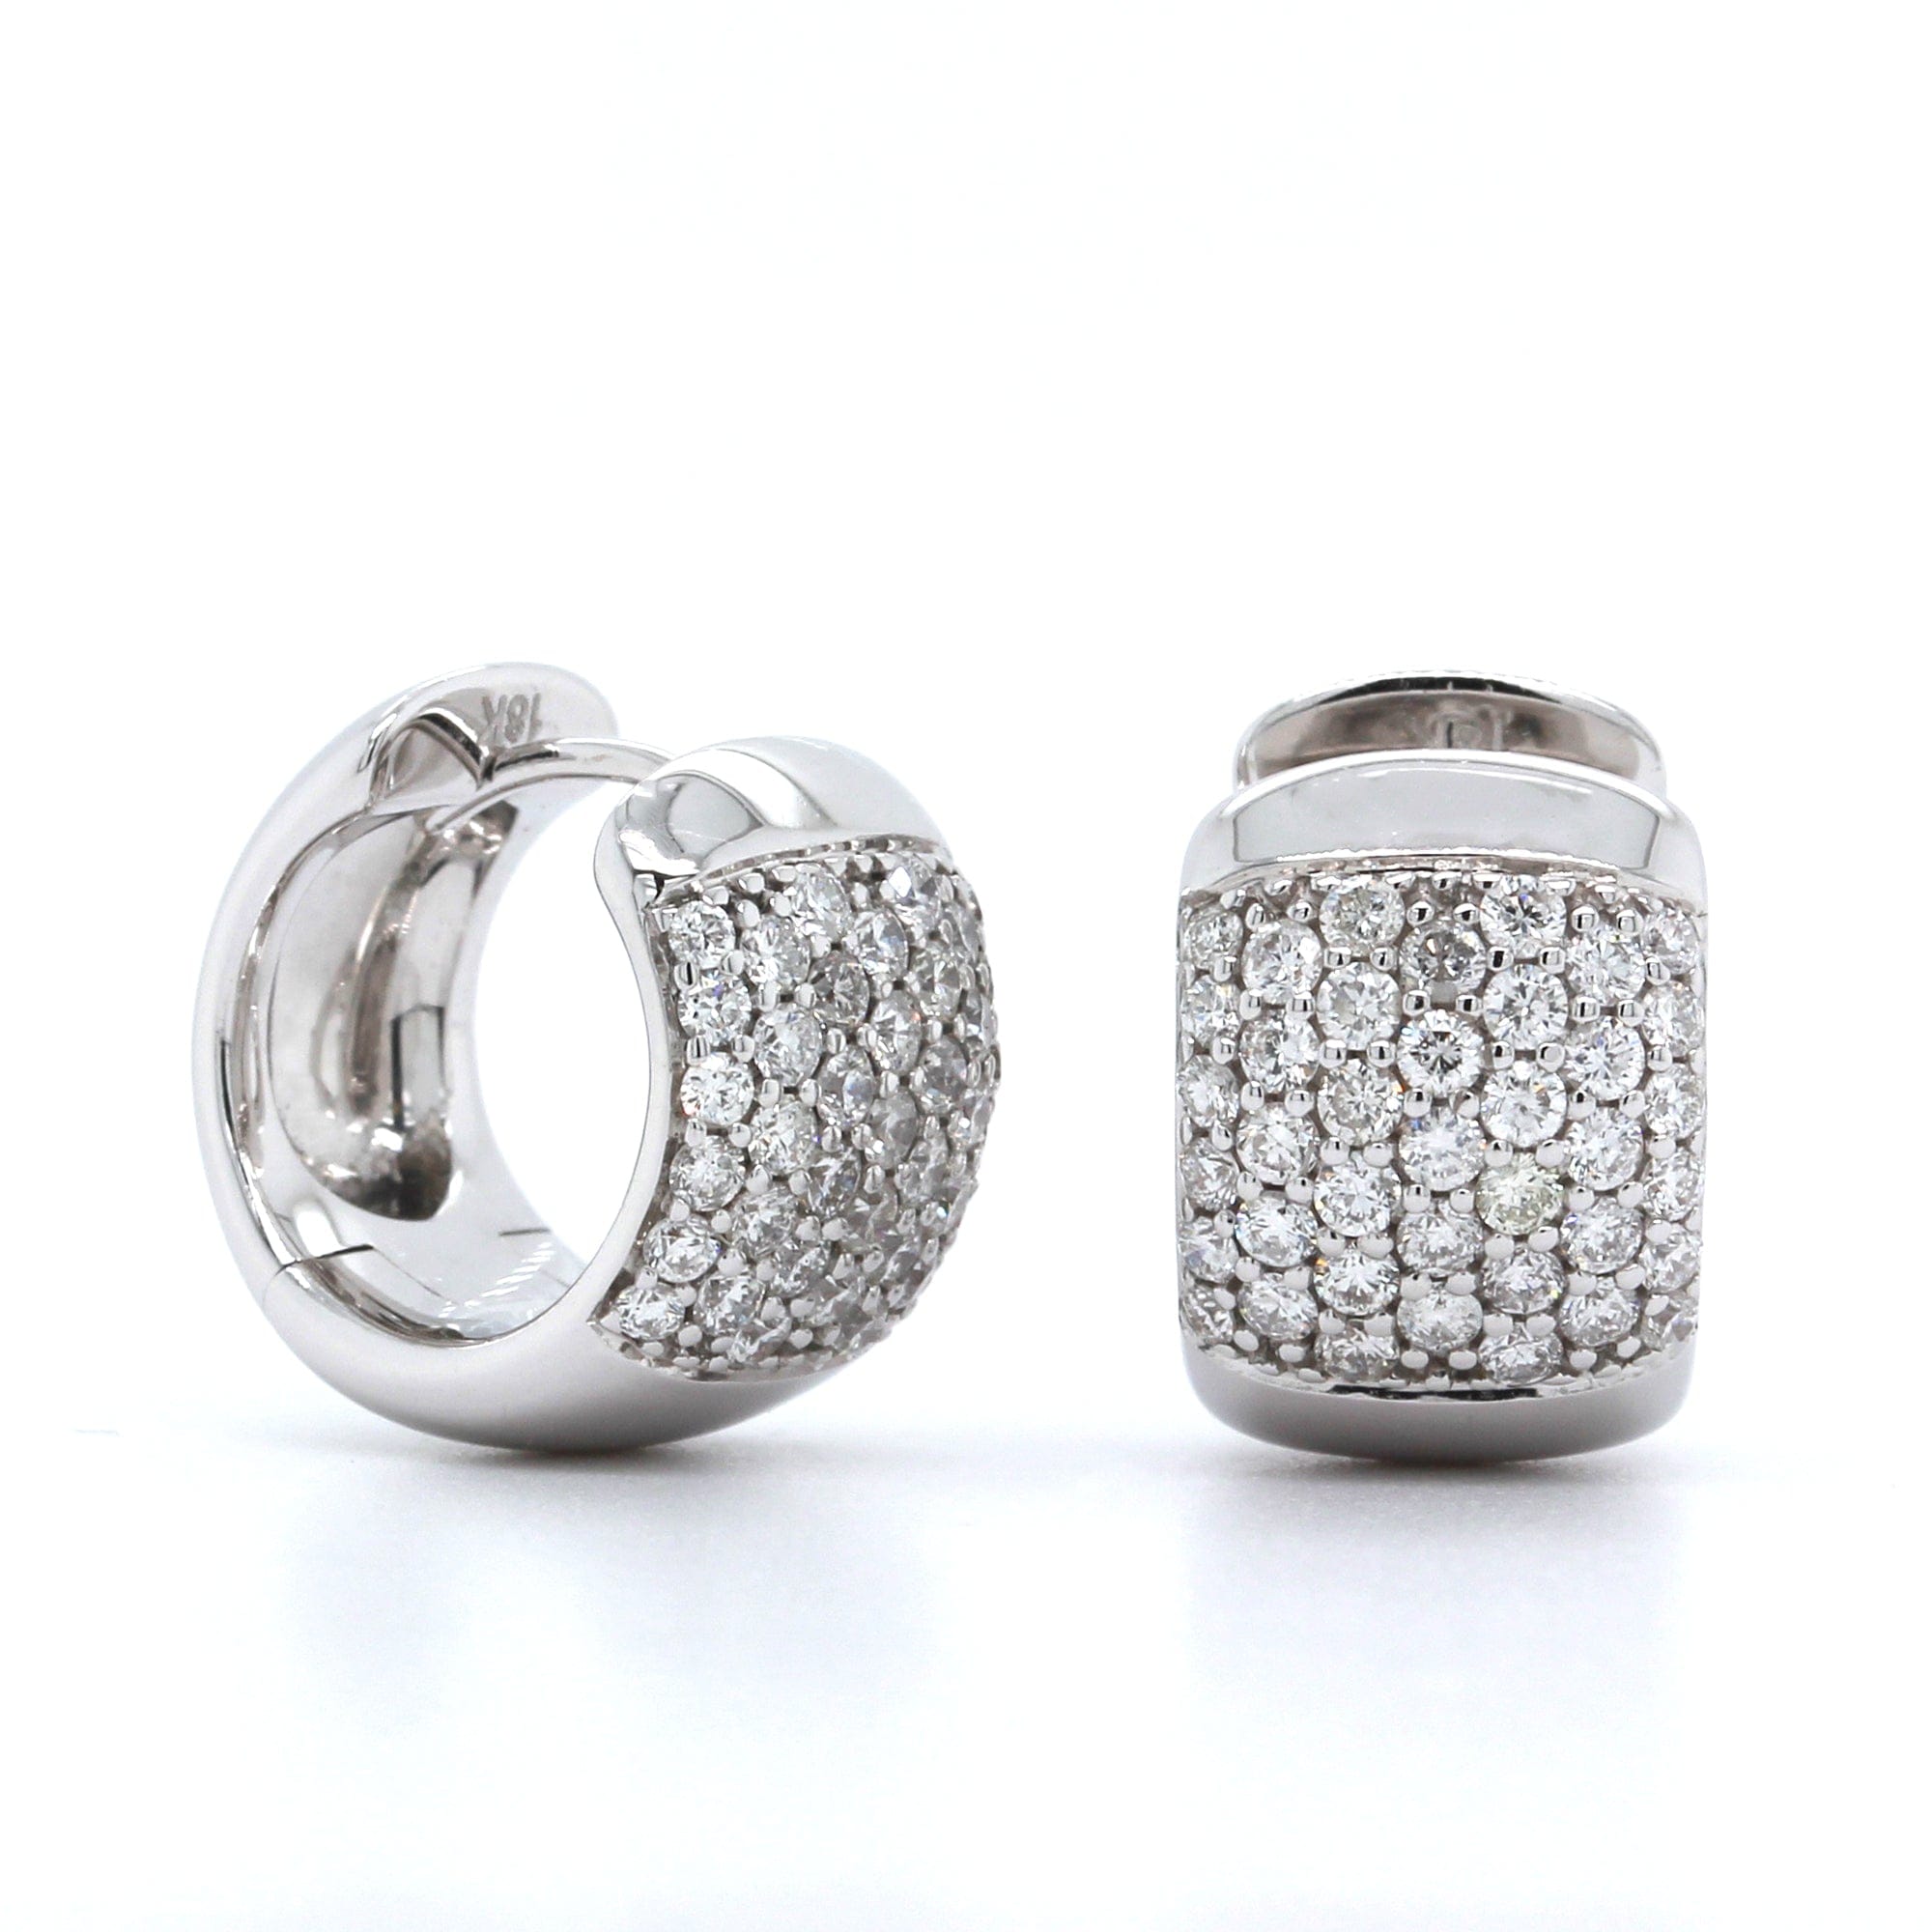 18K White Gold Pave Wide Huggie Earrings